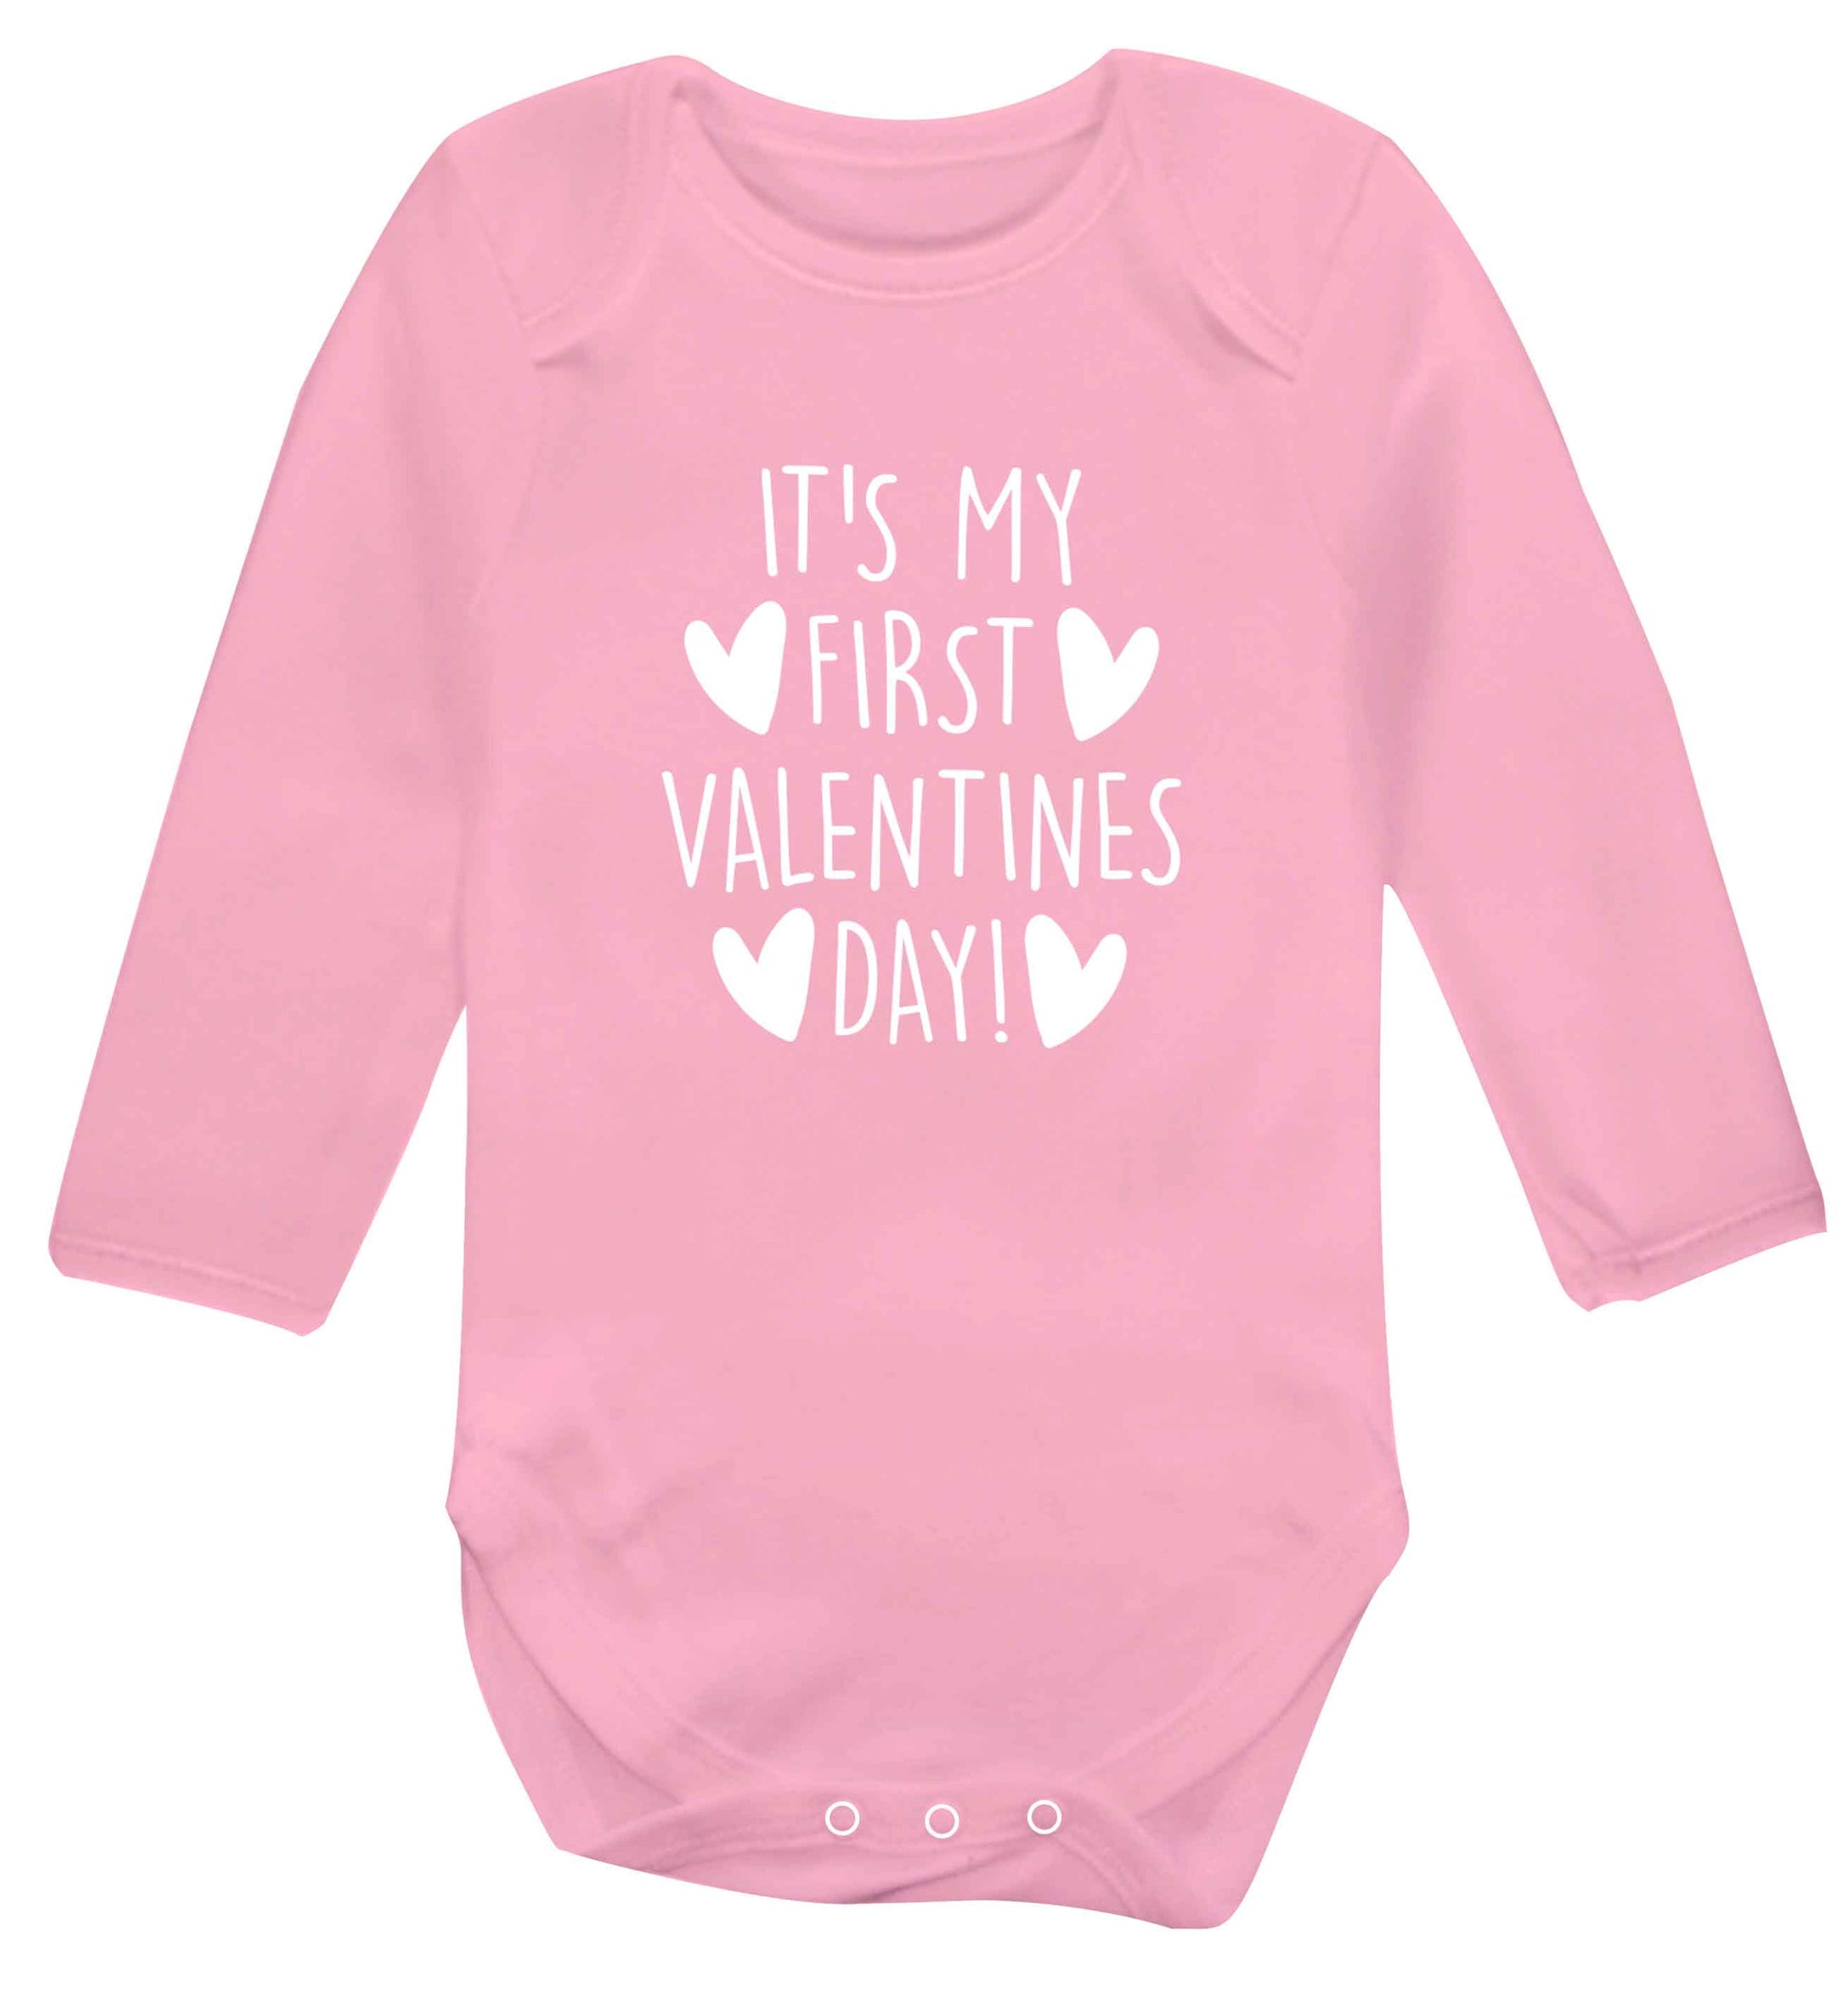 It's my first valentines day! baby vest long sleeved pale pink 6-12 months